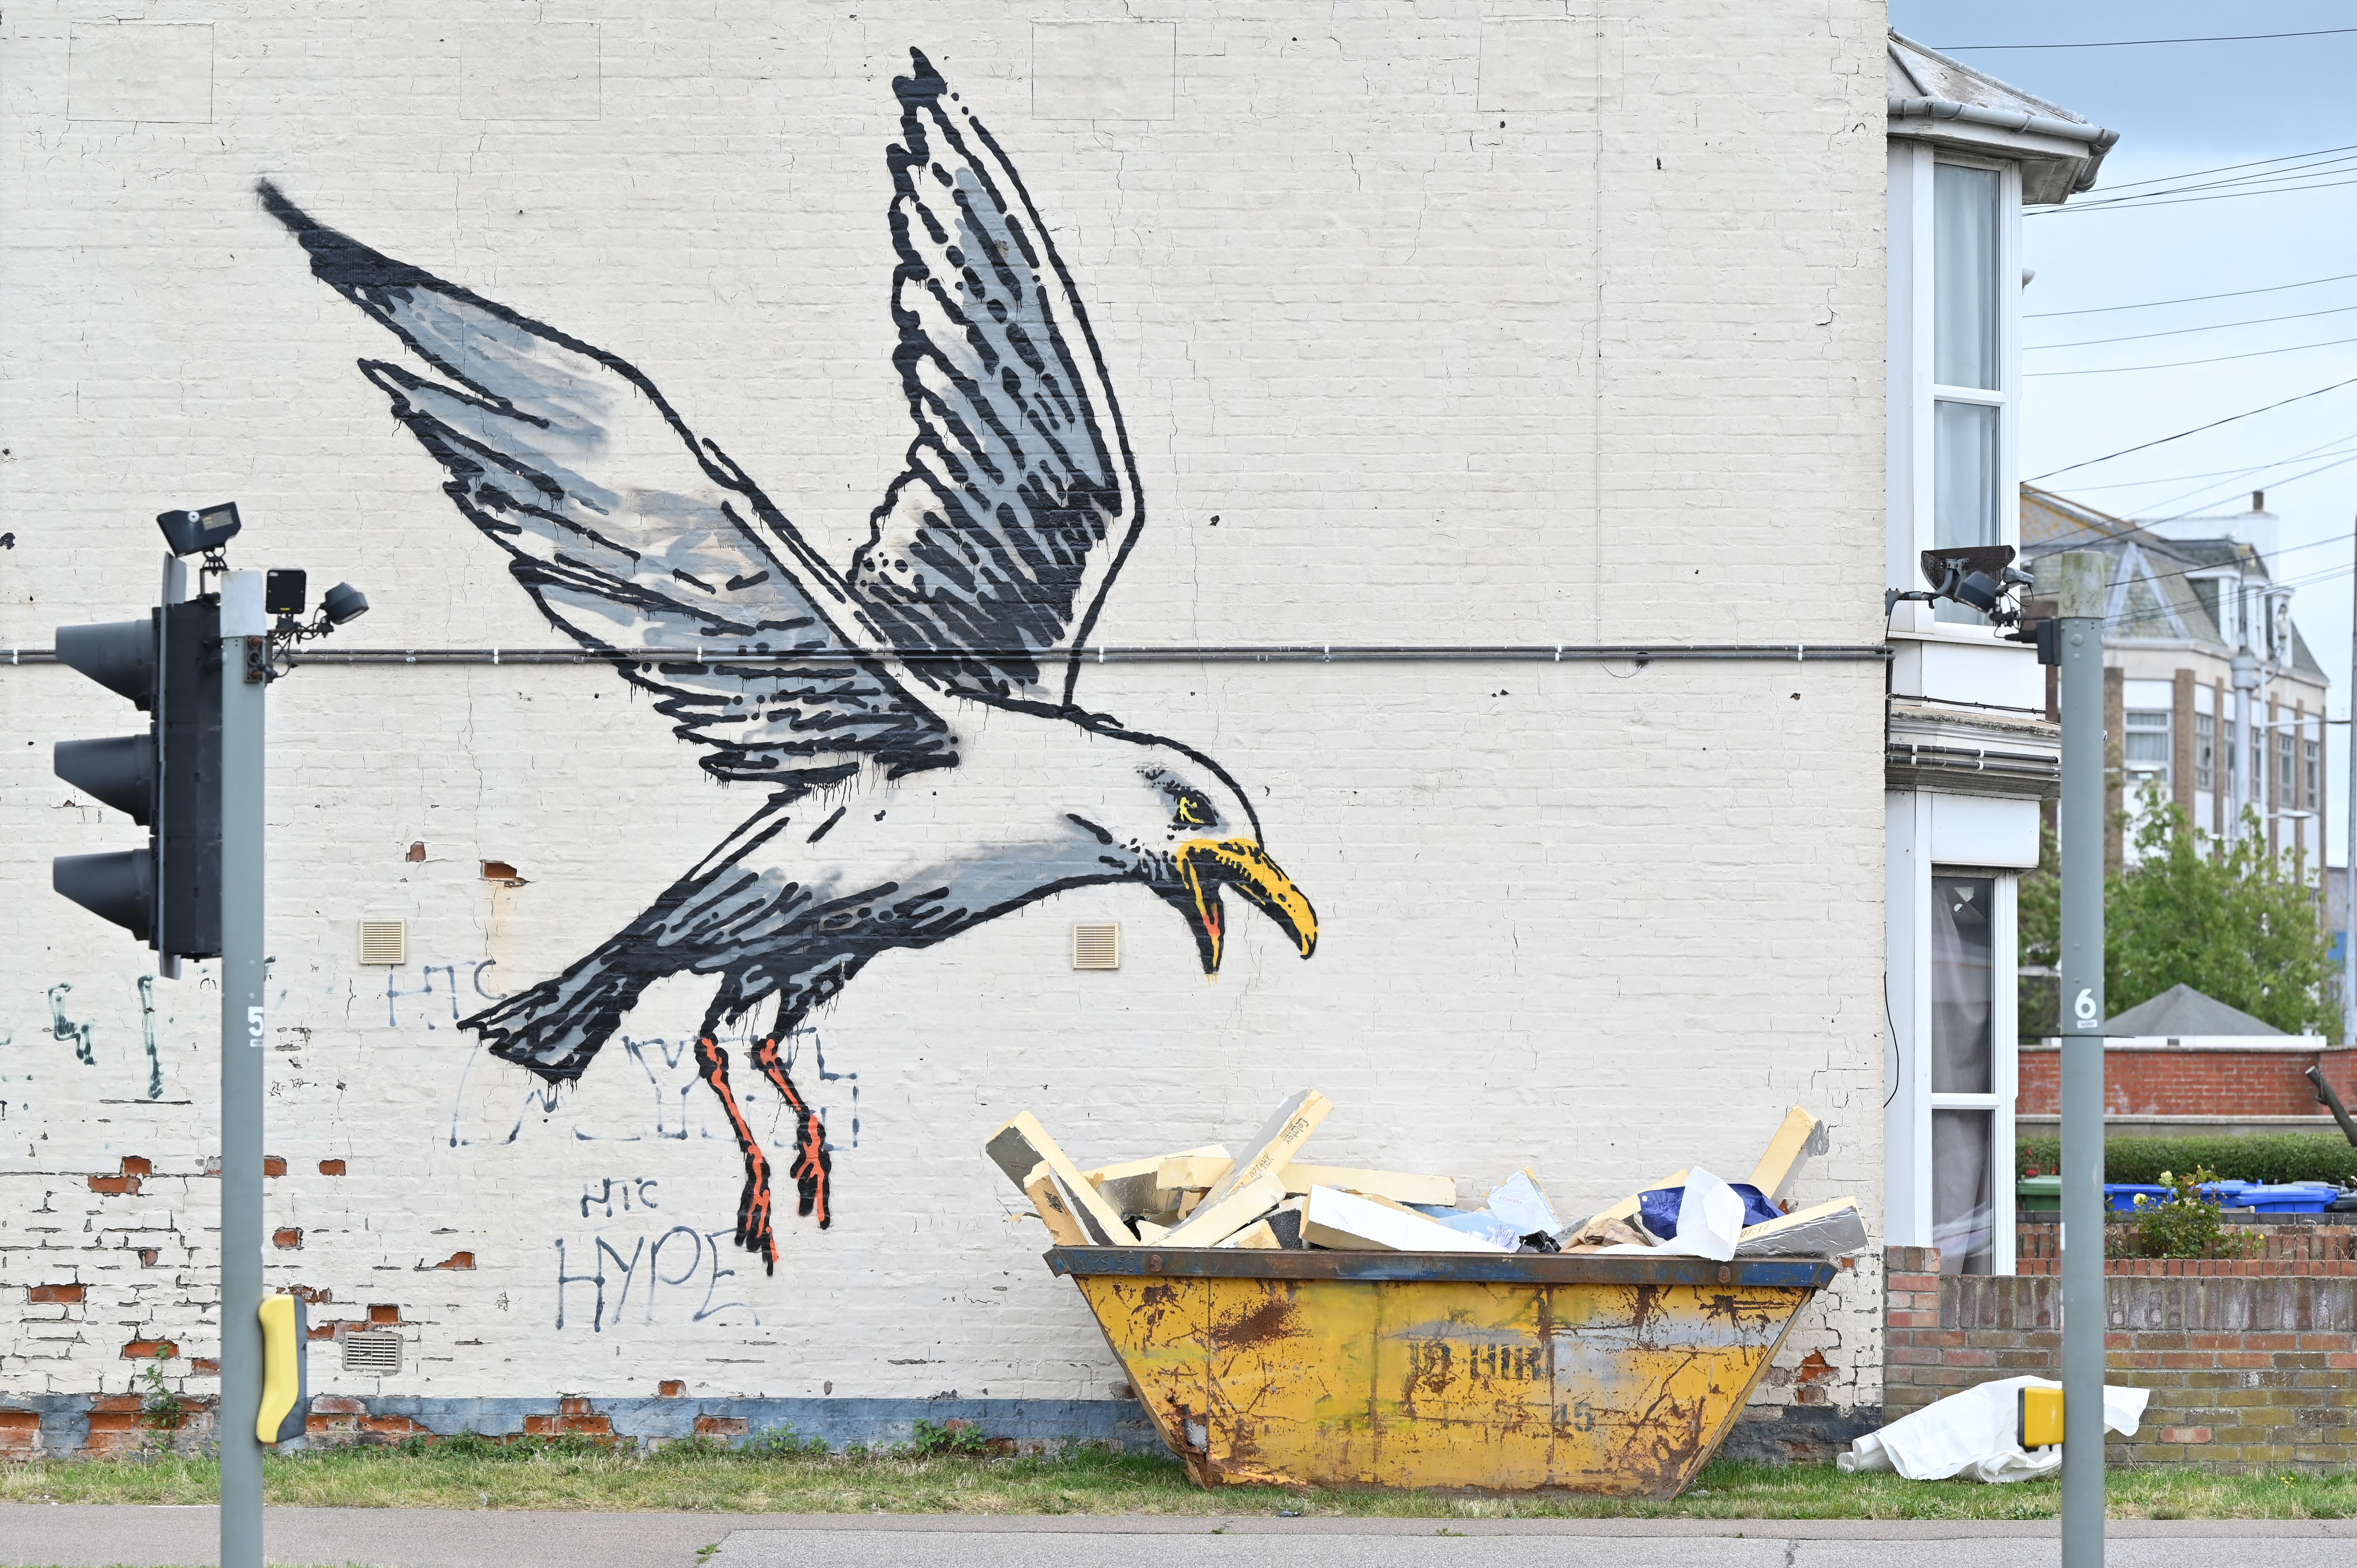 Banksy May Have Just Gone on an Art-Making Spree, With Murals and